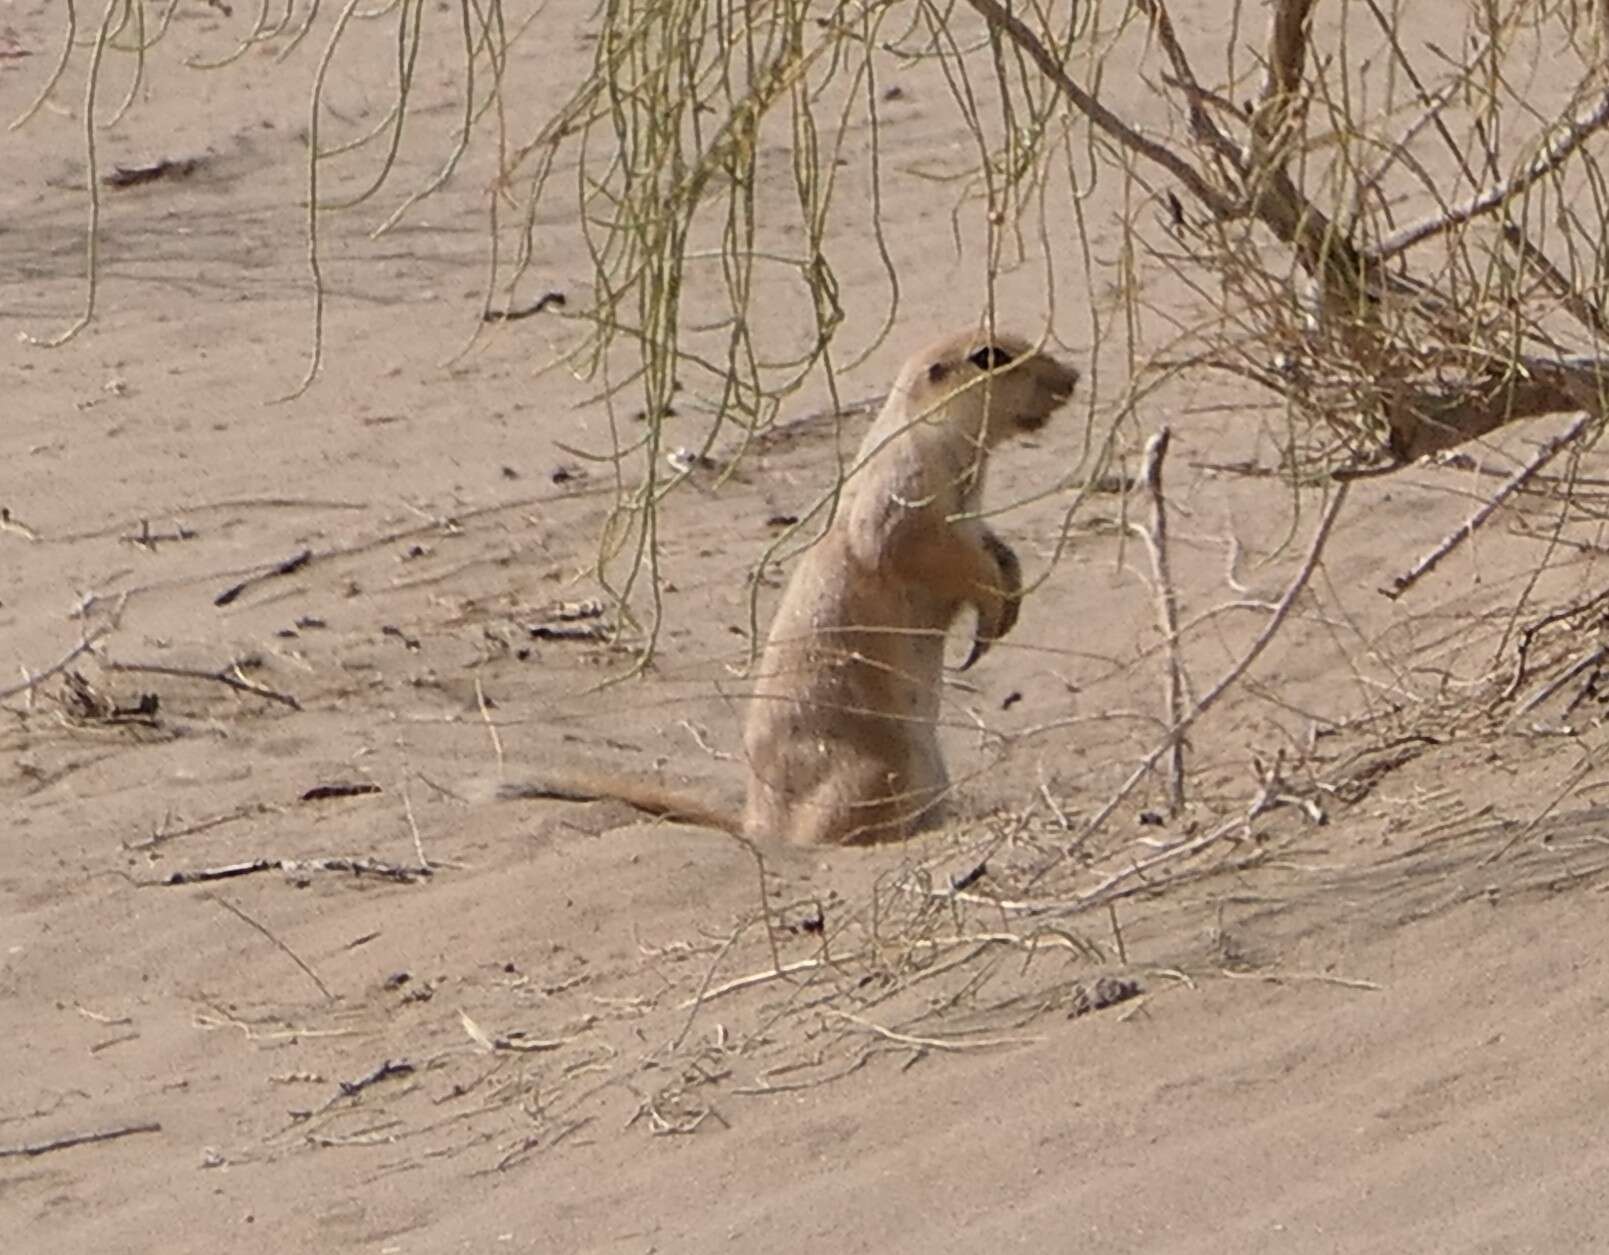 Image of long-clawed ground squirrel